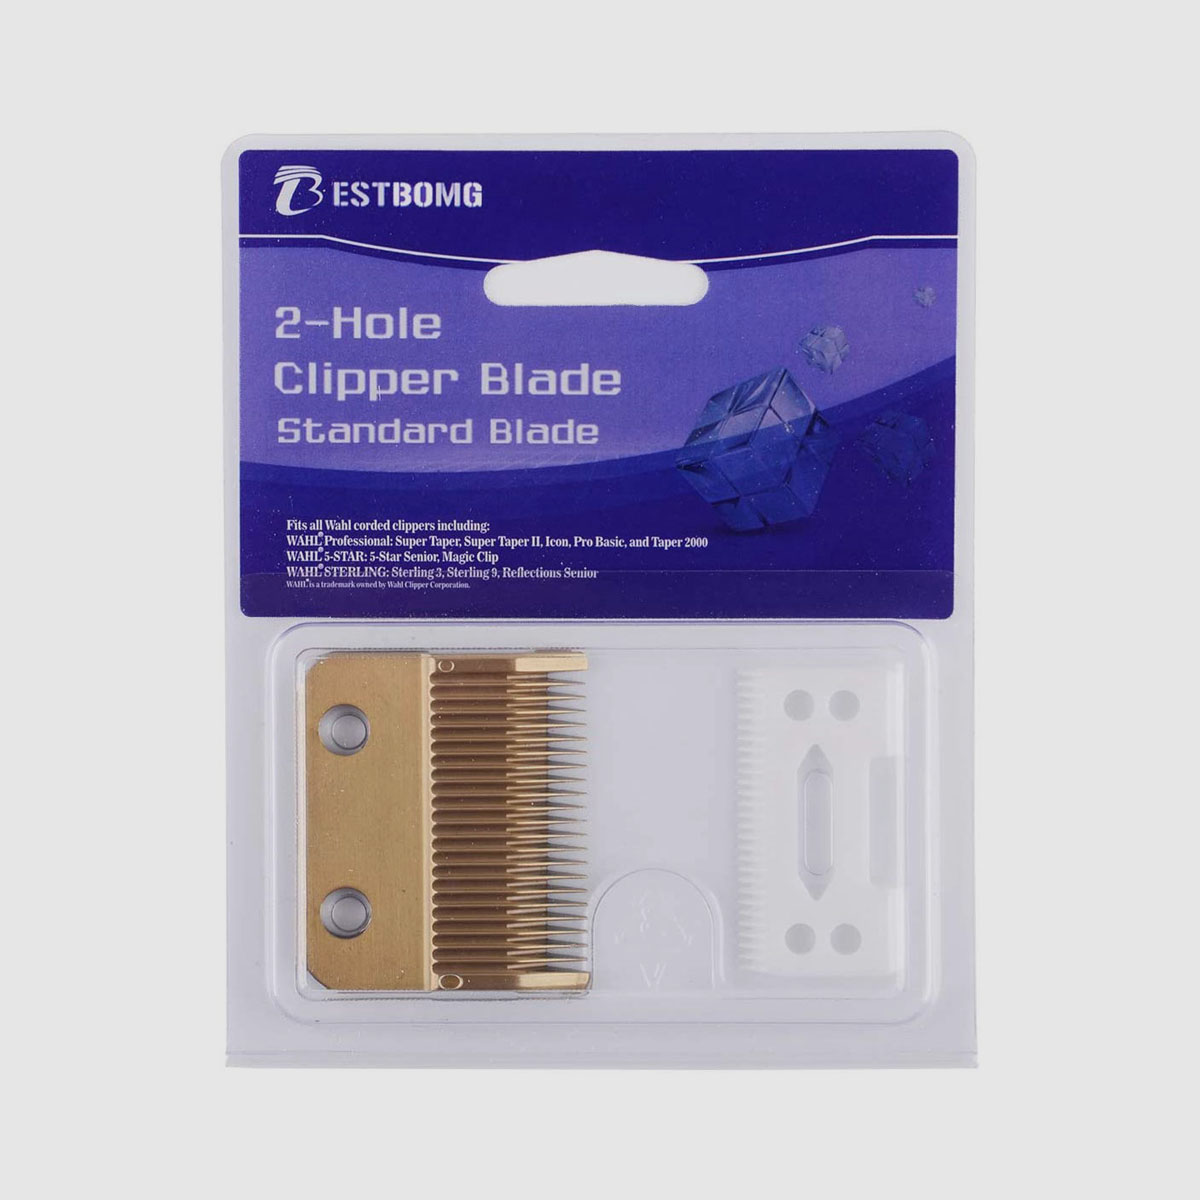 Animal Clippers Blades 2 Hole (1mm-3mm) # 1006 - 1 